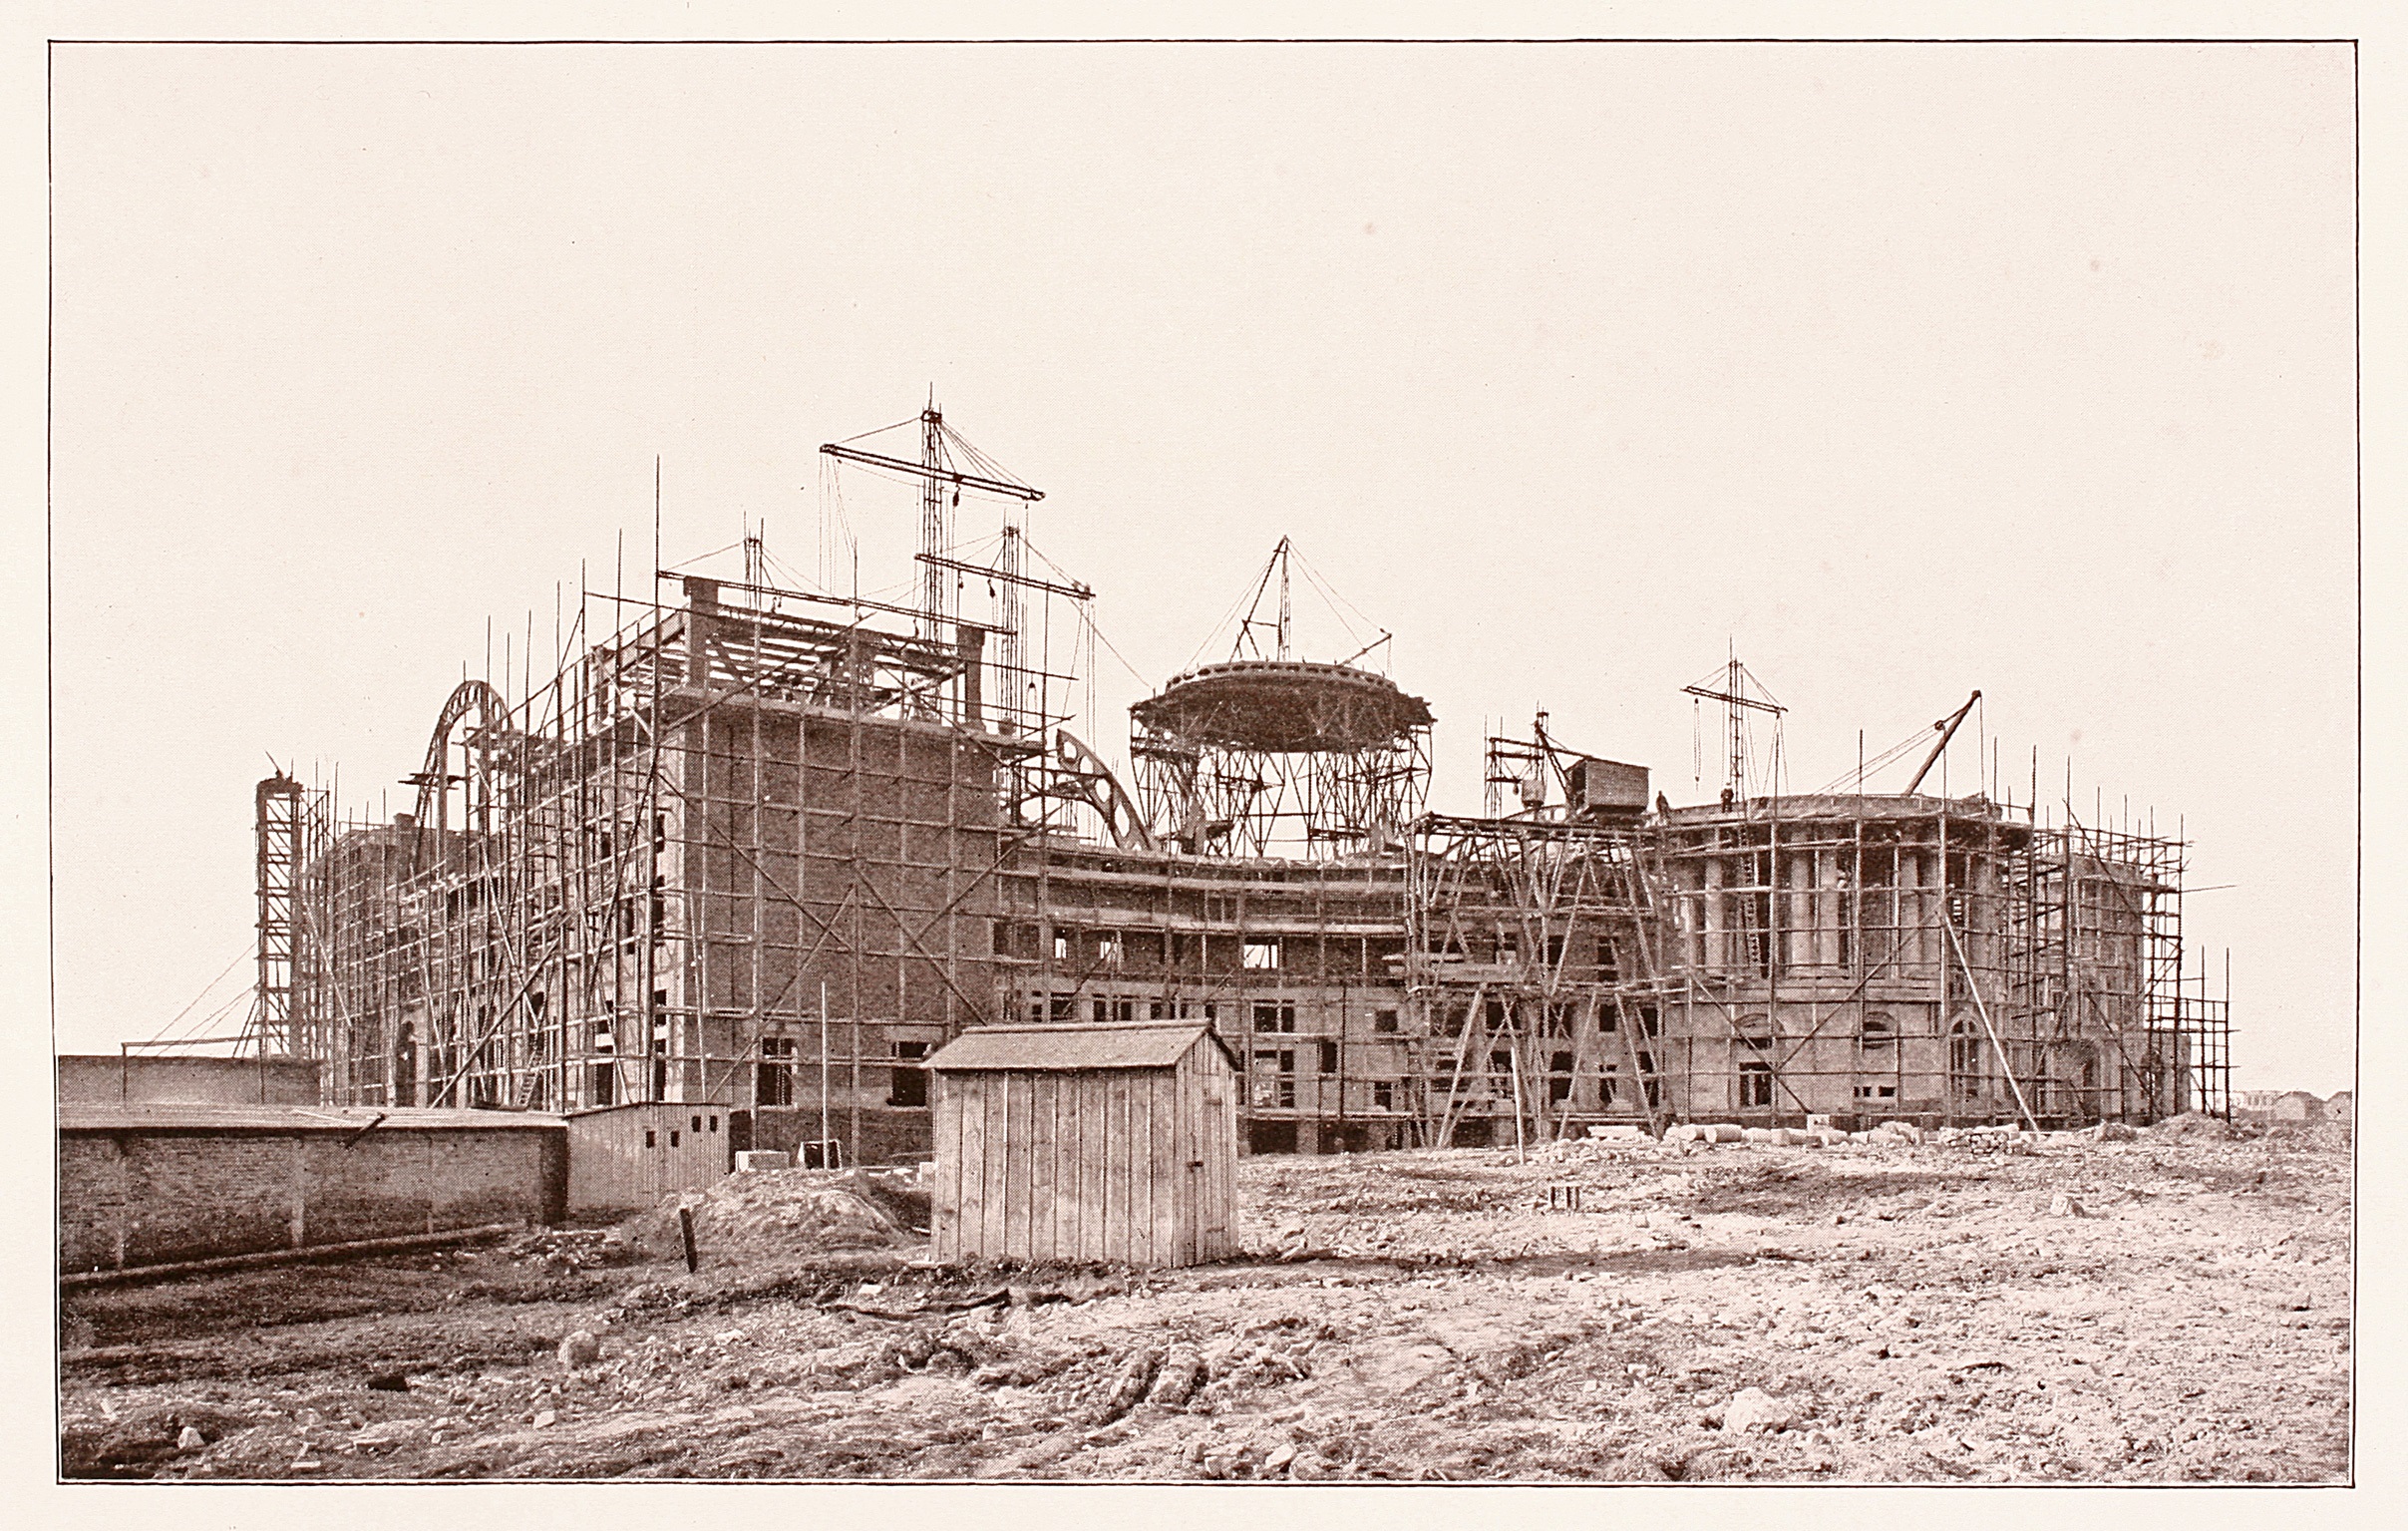 Construction work for the Festhalle